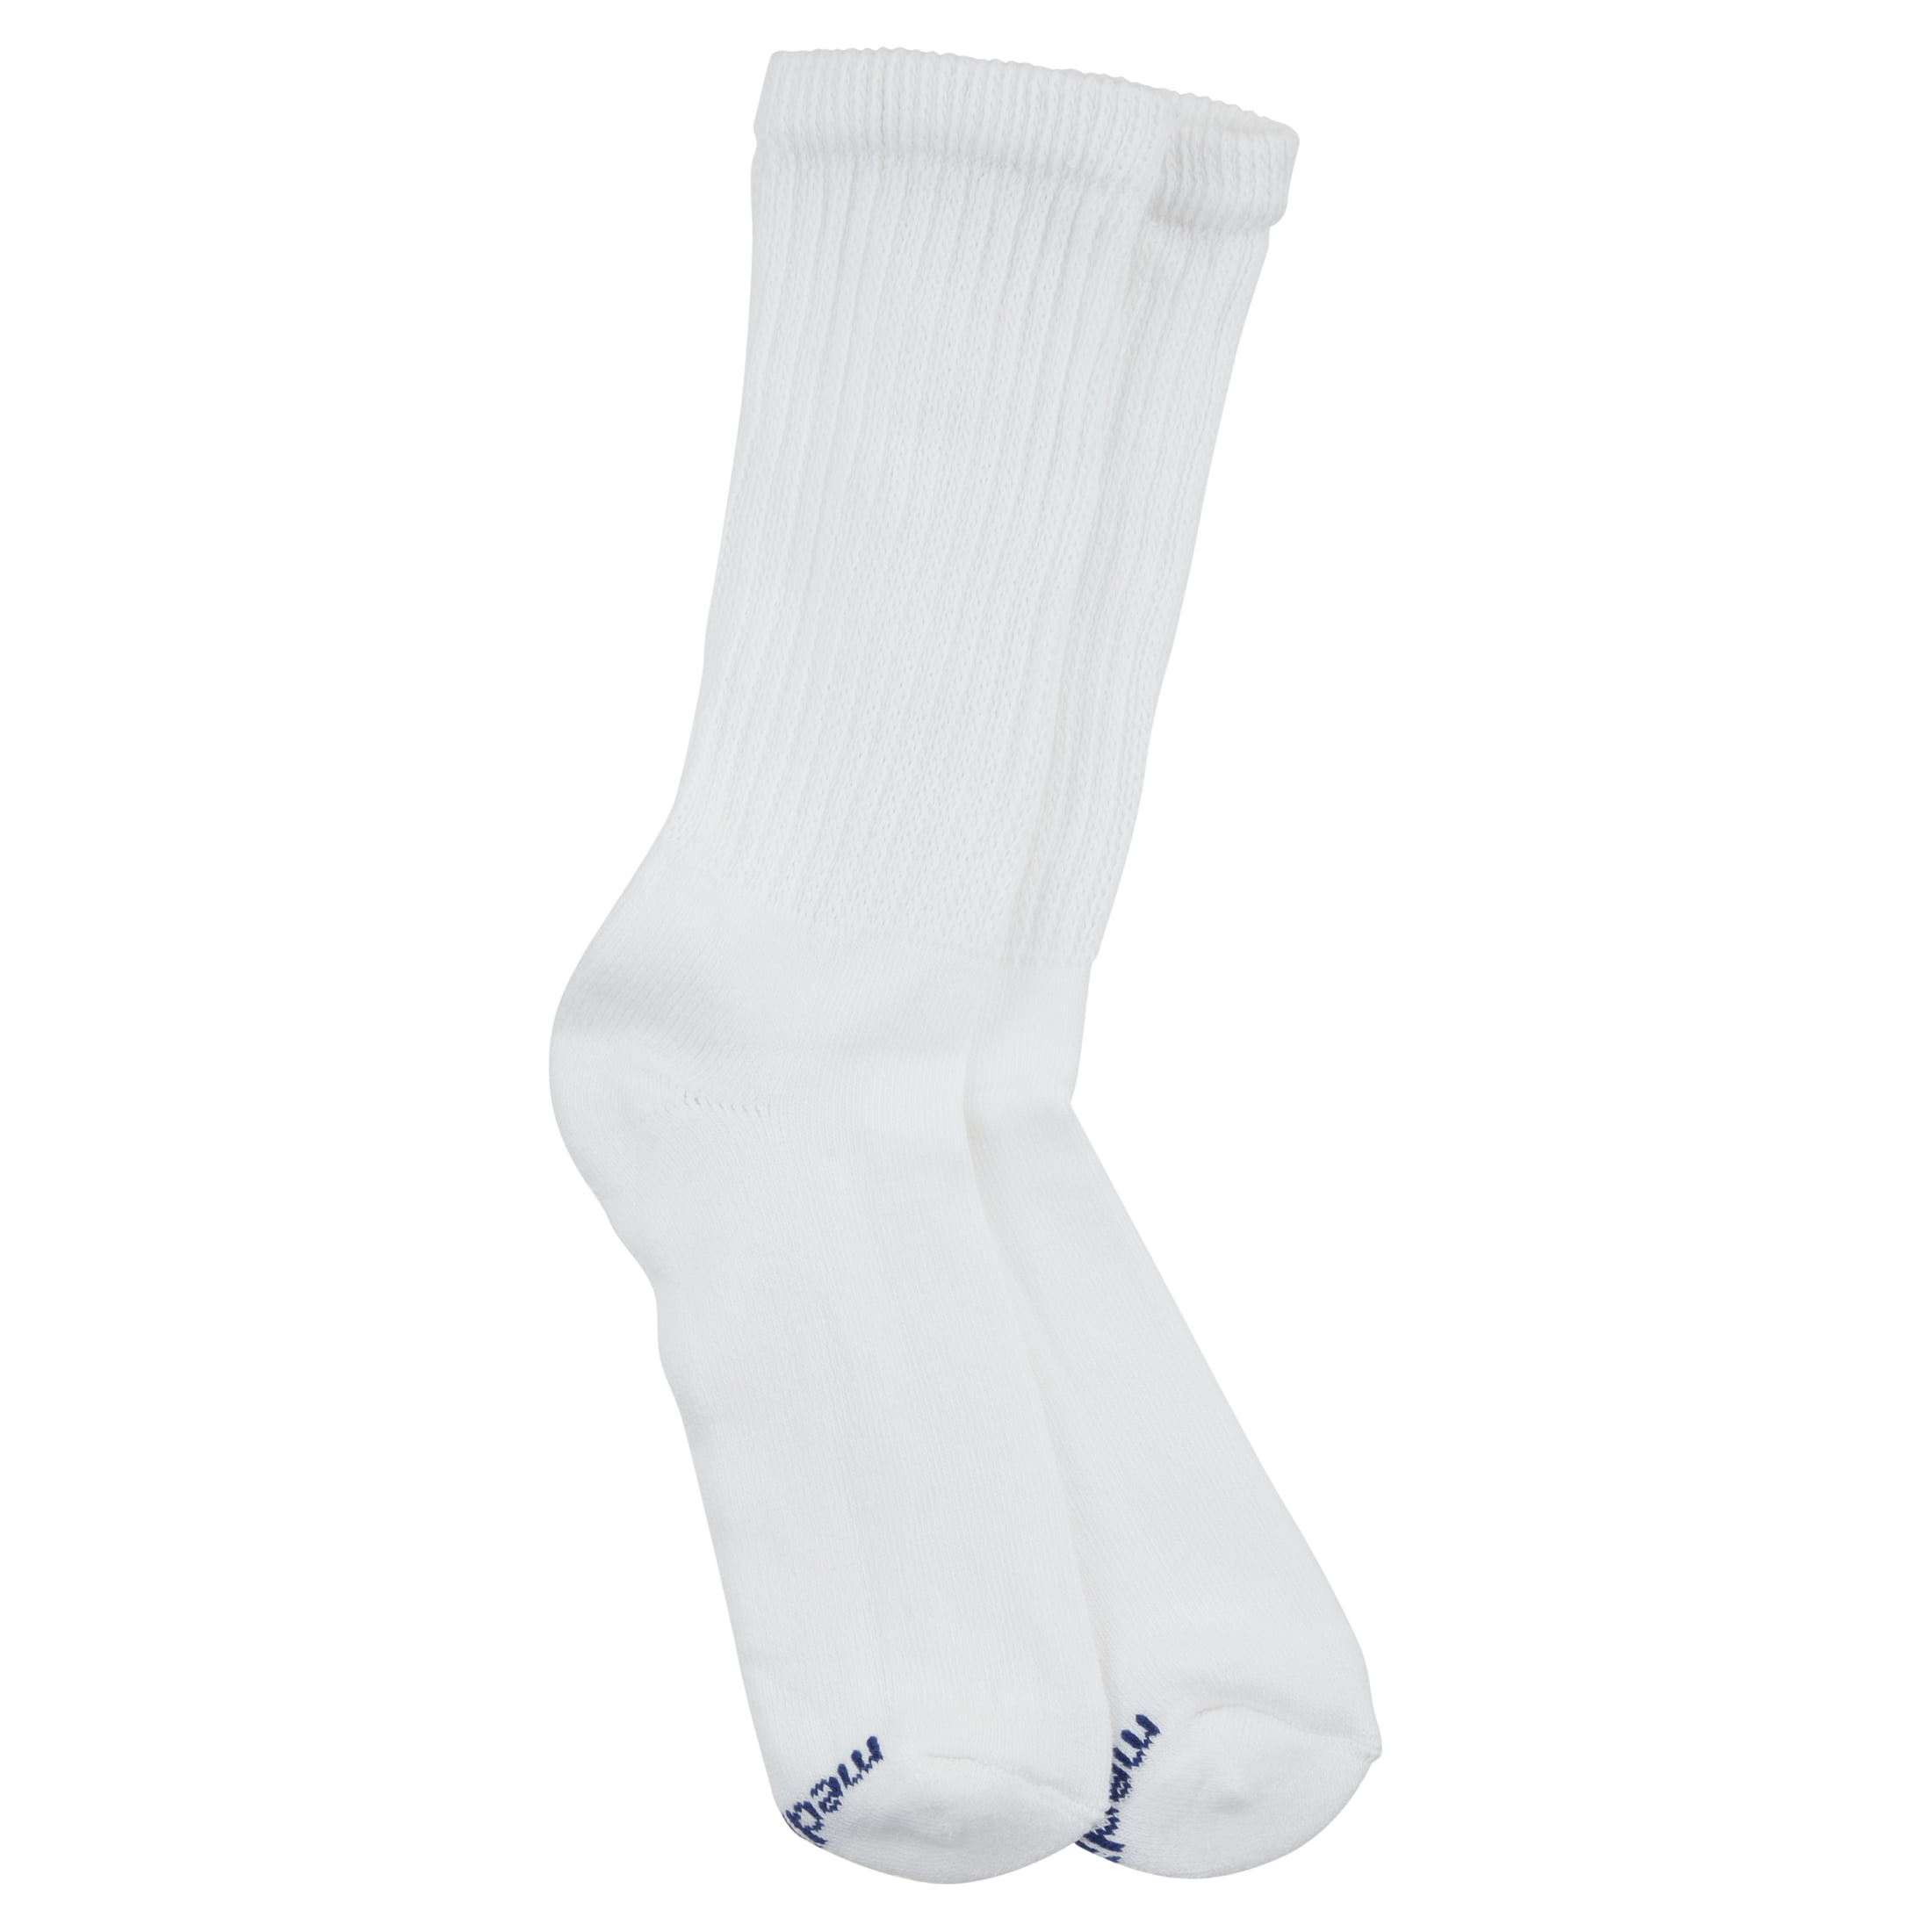 MediPeds Diabetic Cool Max Crew Socks, Large, 2 Pack